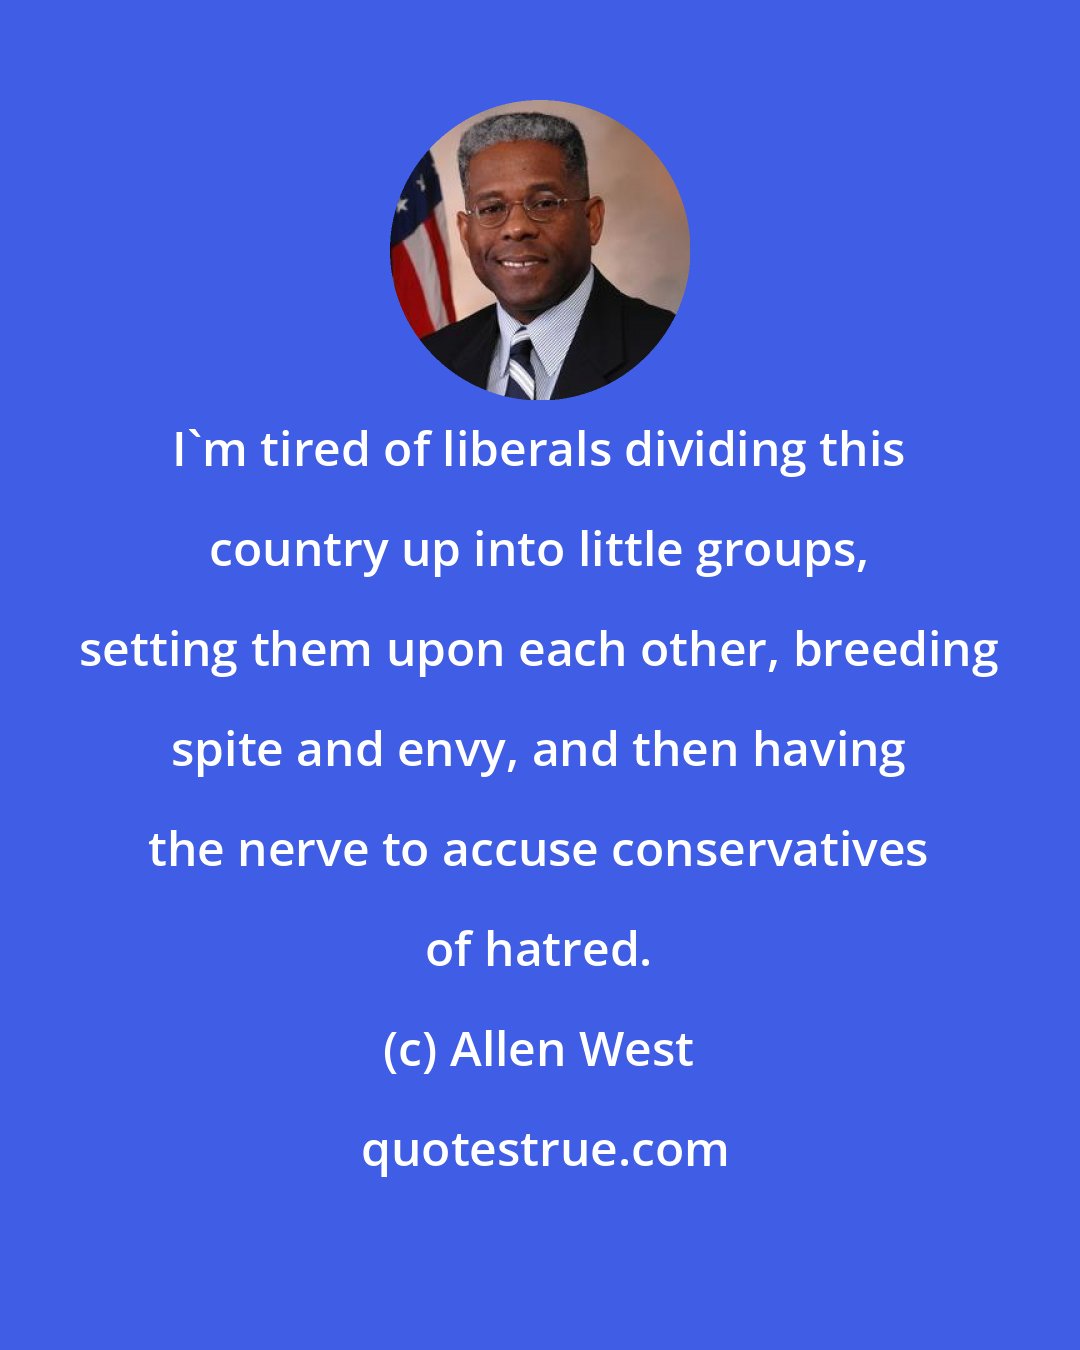 Allen West: I'm tired of liberals dividing this country up into little groups, setting them upon each other, breeding spite and envy, and then having the nerve to accuse conservatives of hatred.